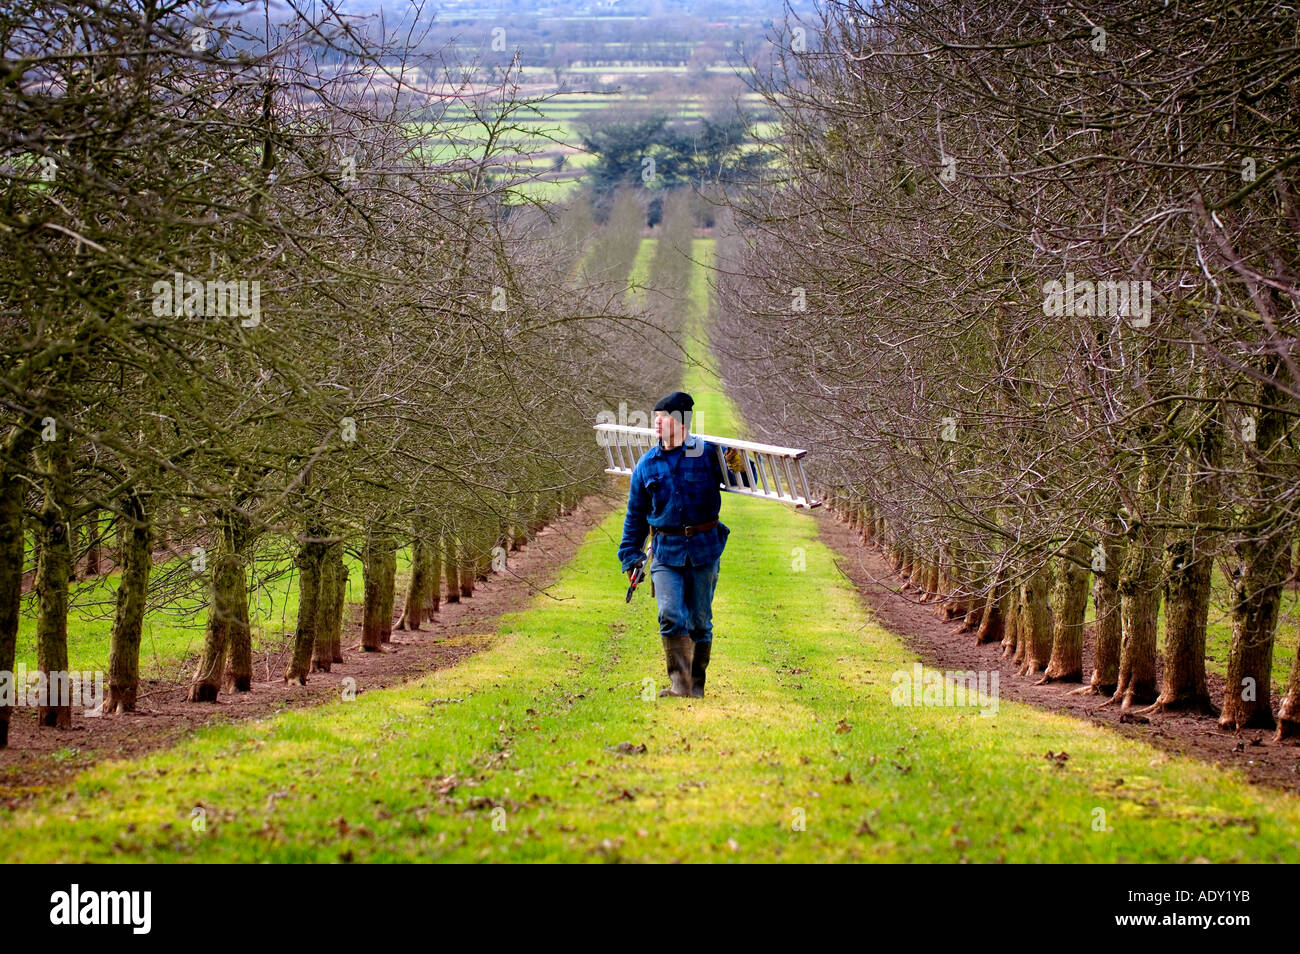 Winter pruning of apple trees at Almondsbury Cider orchard supplier of apples to Gaymers Cider Gloucestershire England Stock Photo